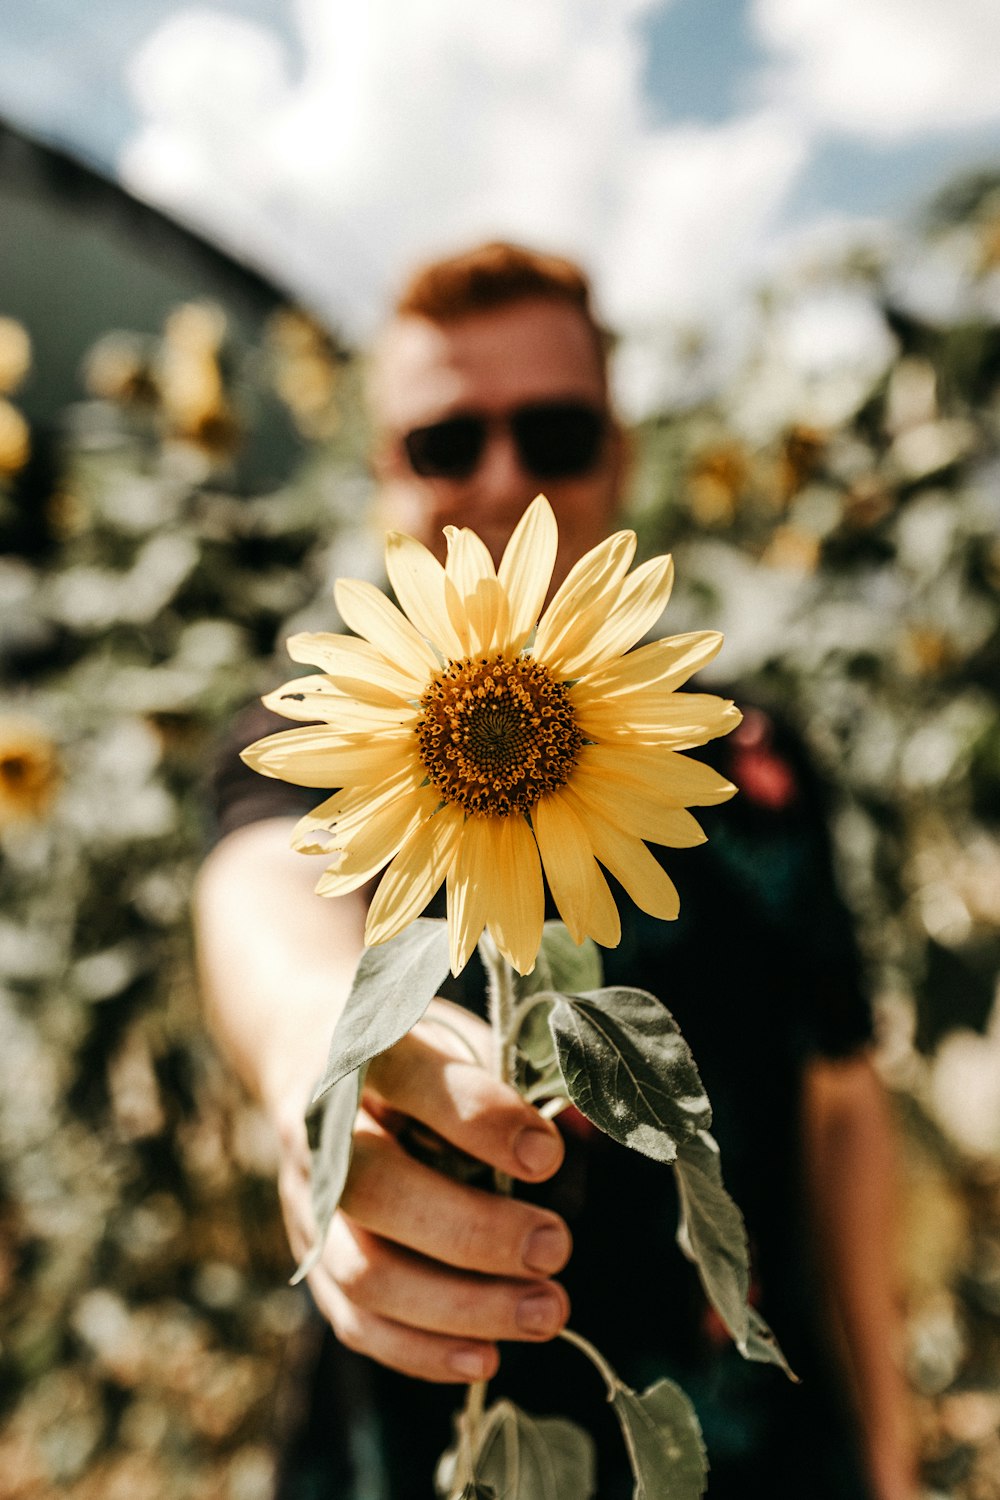 smiling man standing and showing yellow sunflower